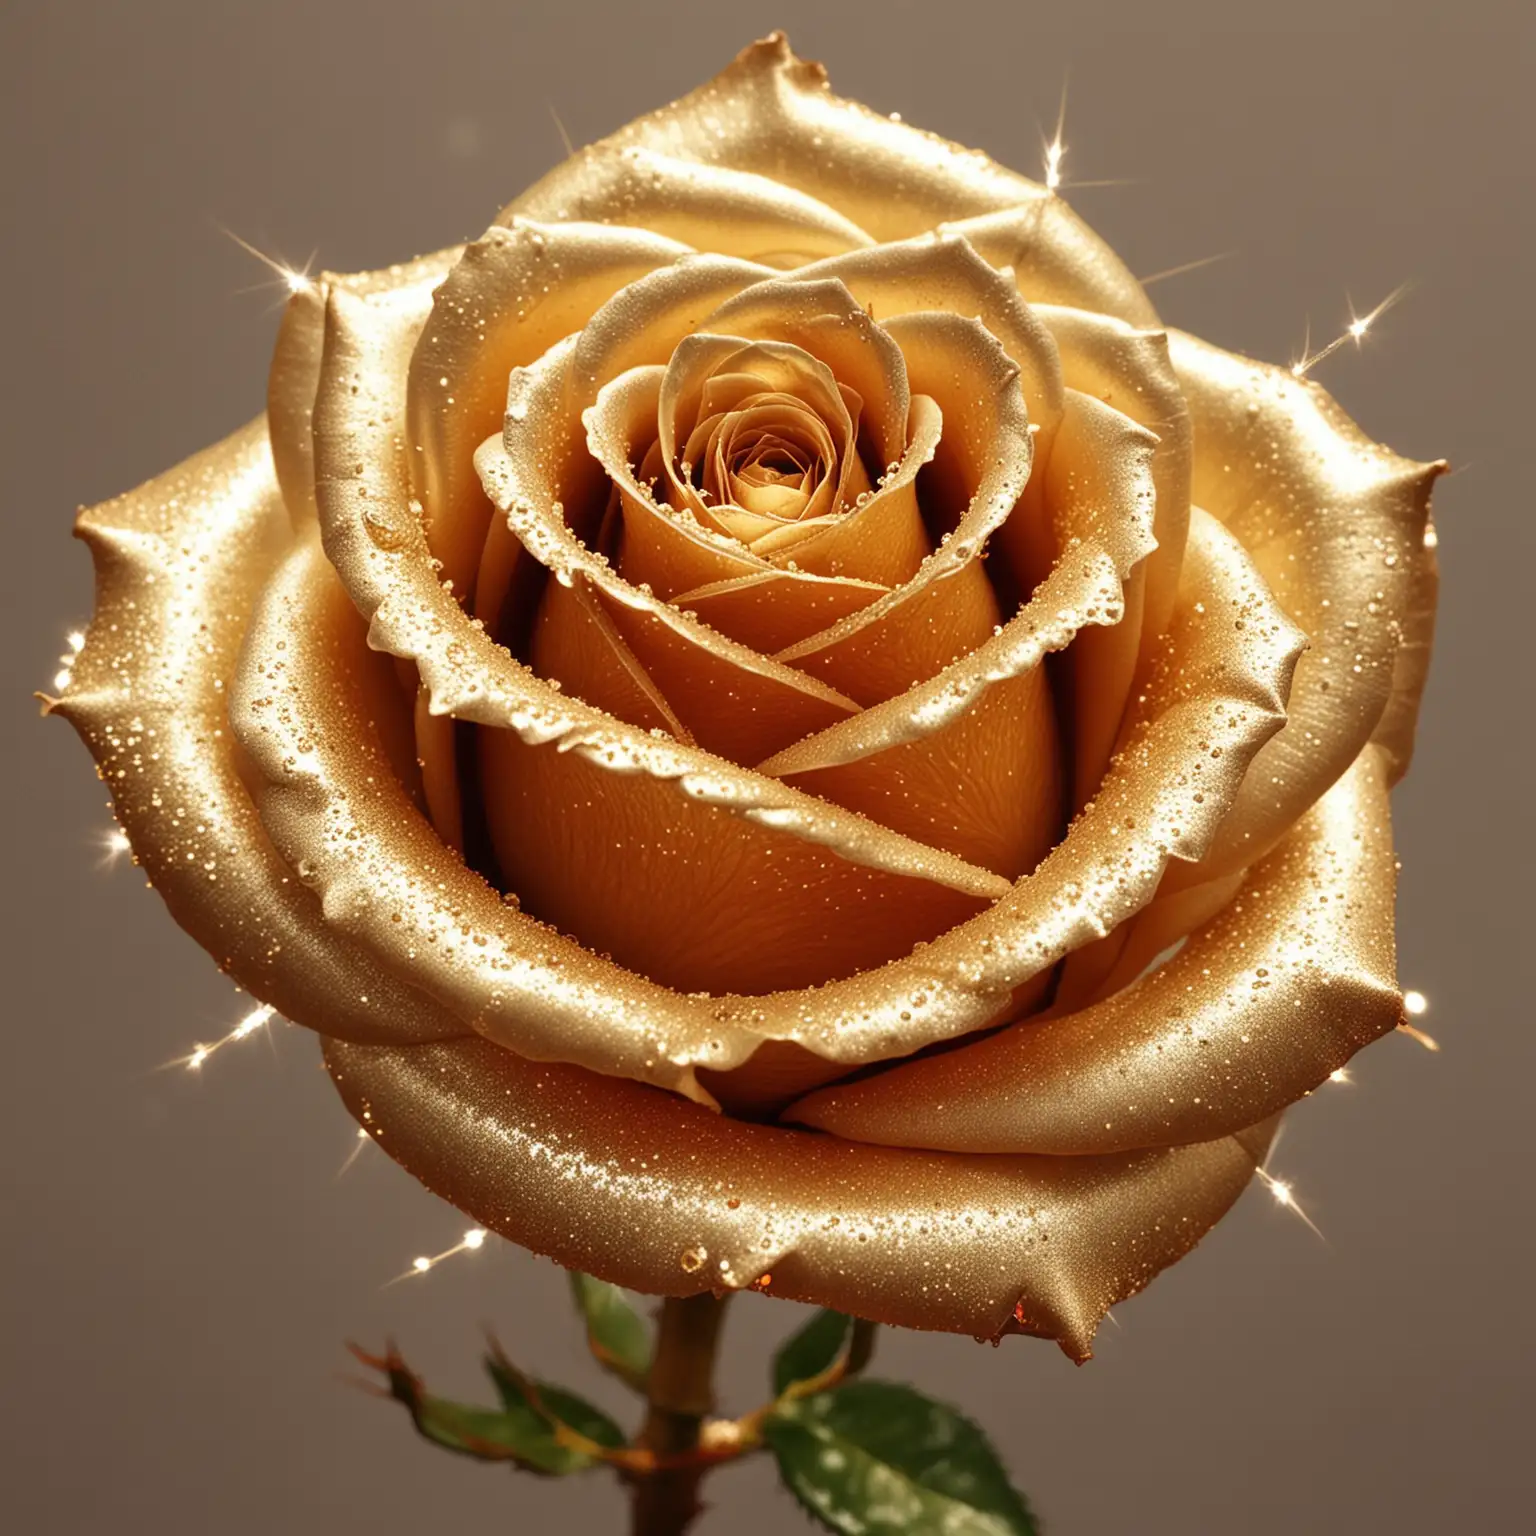 Glistening Gold Rose with Glittering Sparkles